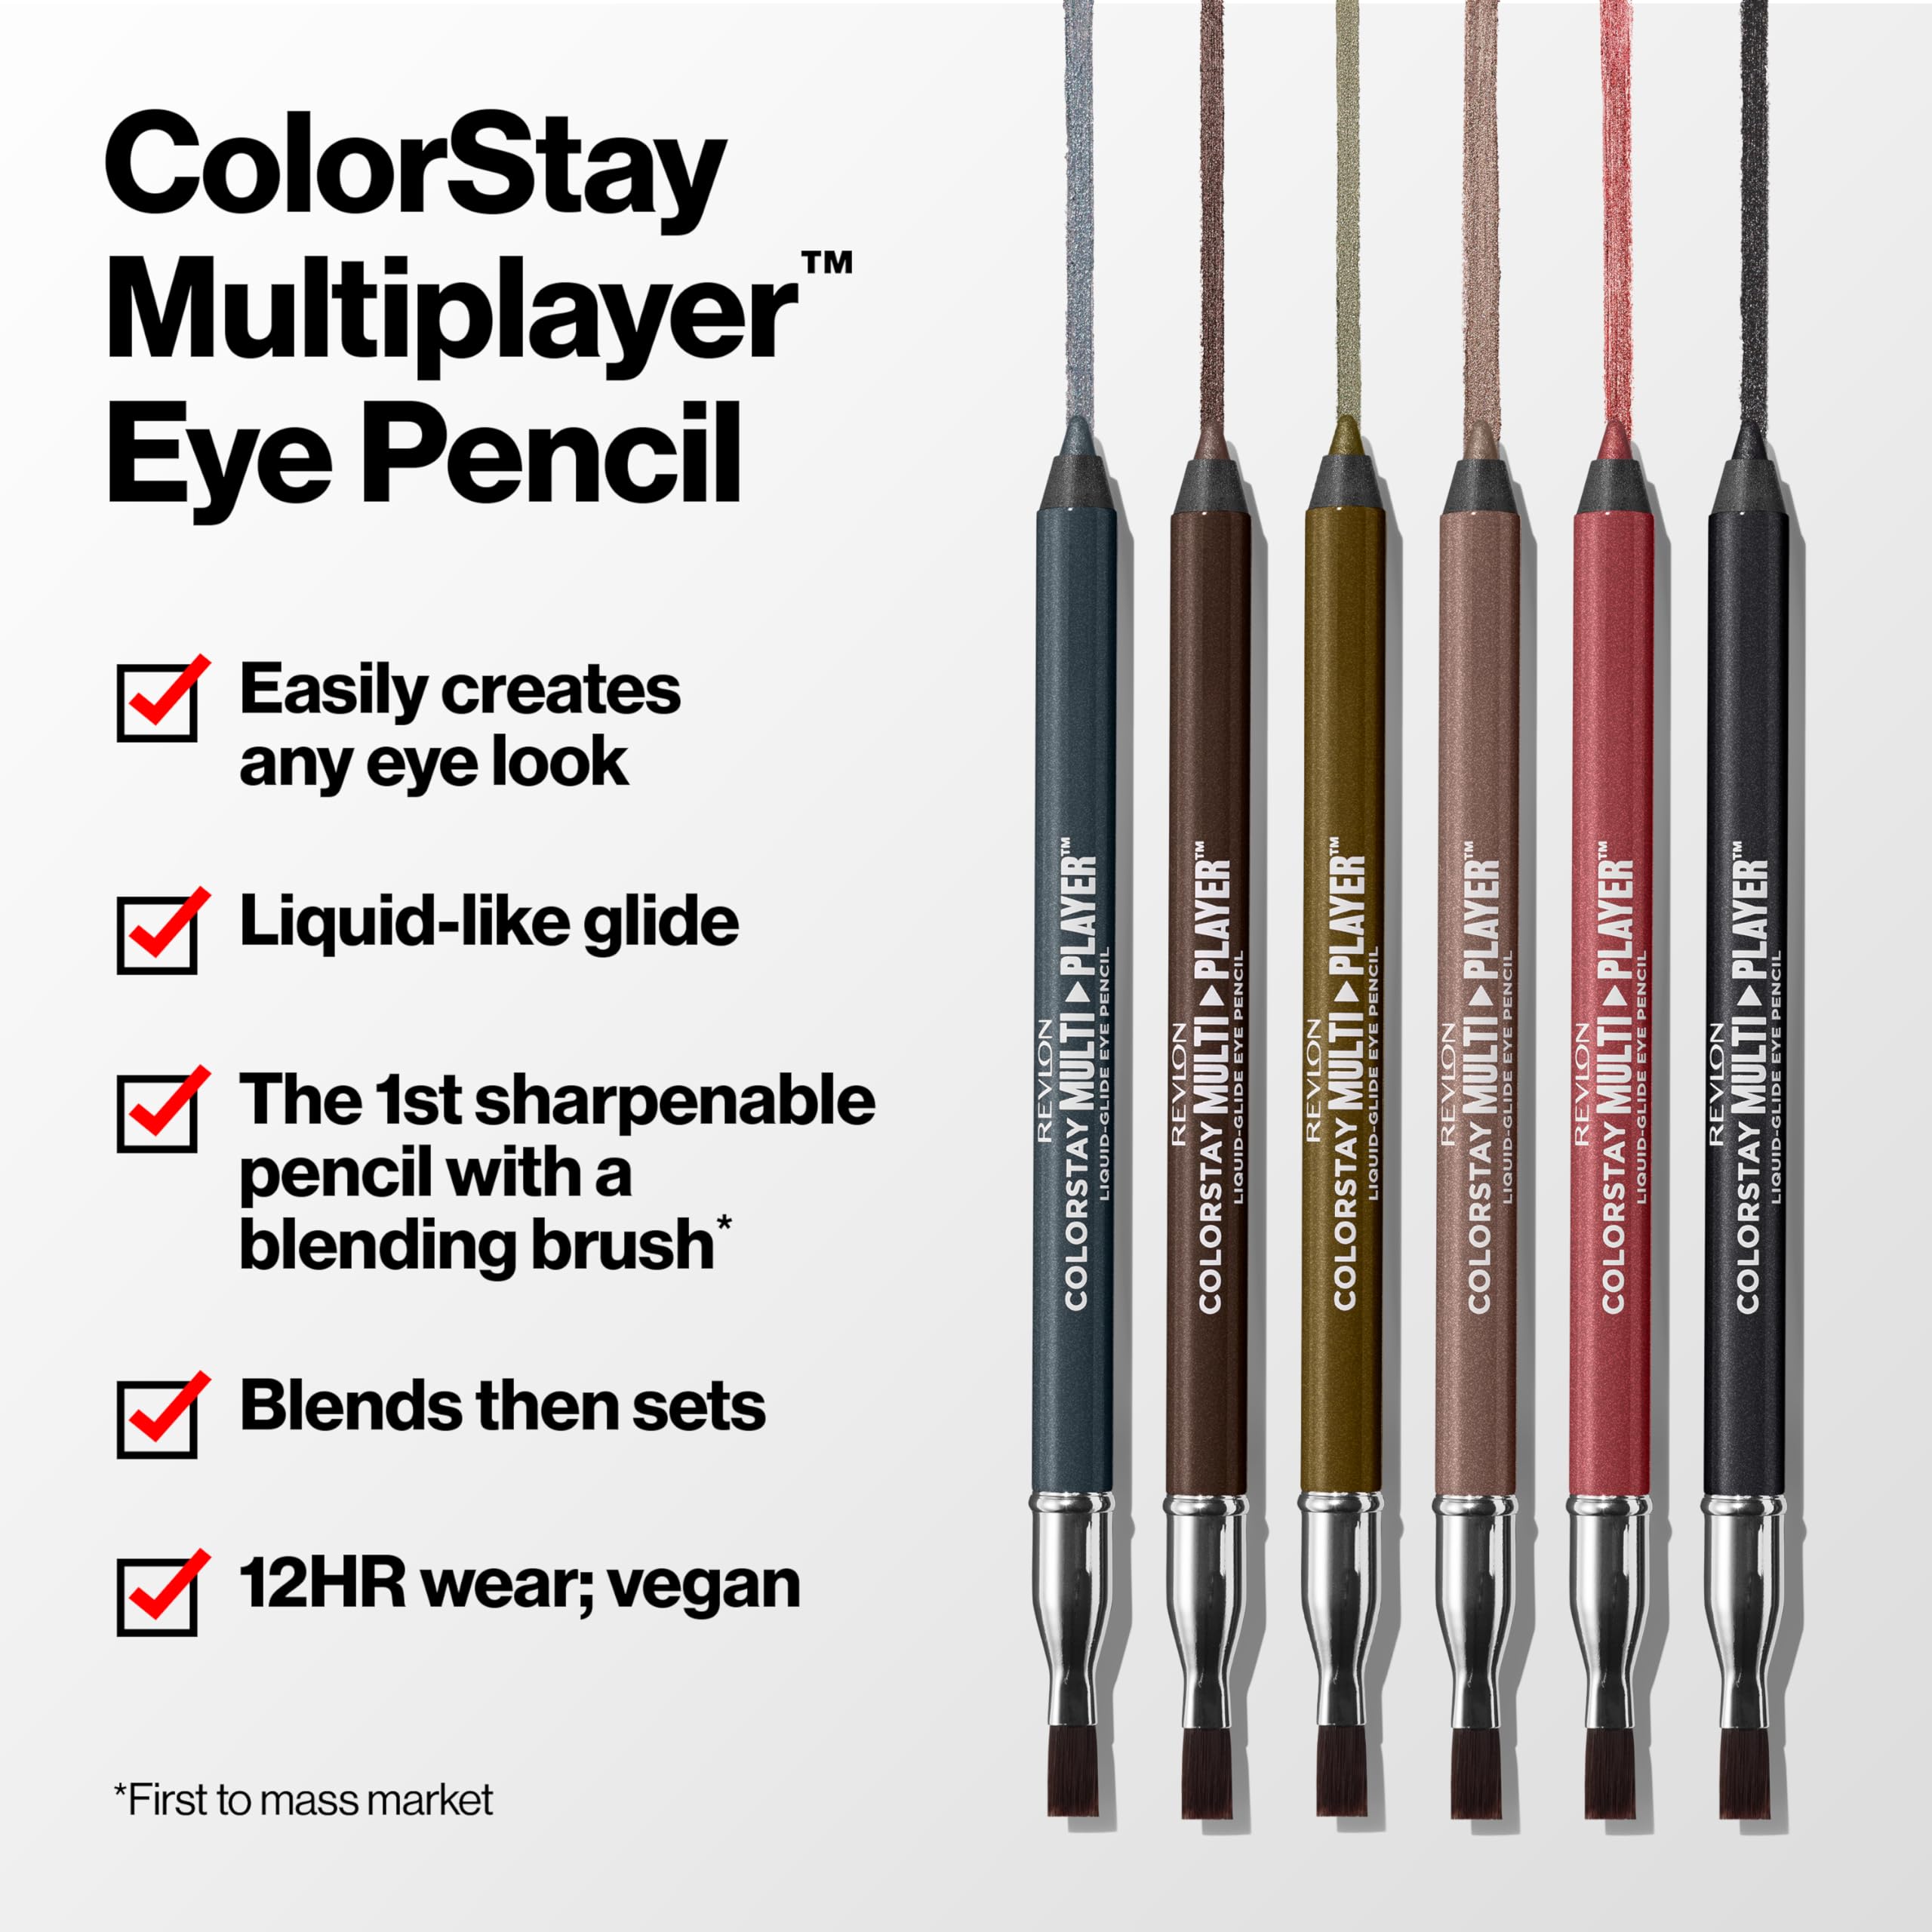 REVLON ColorStay Multiplayer Liquid-Glide Eye Pencil, Multi-Use Eye Makeup With Blending Brush, Blends Then Sets, Creamy Texture, Waterproof, Smudge-proof, Longwearing, 405 Fortress, 0.03 oz